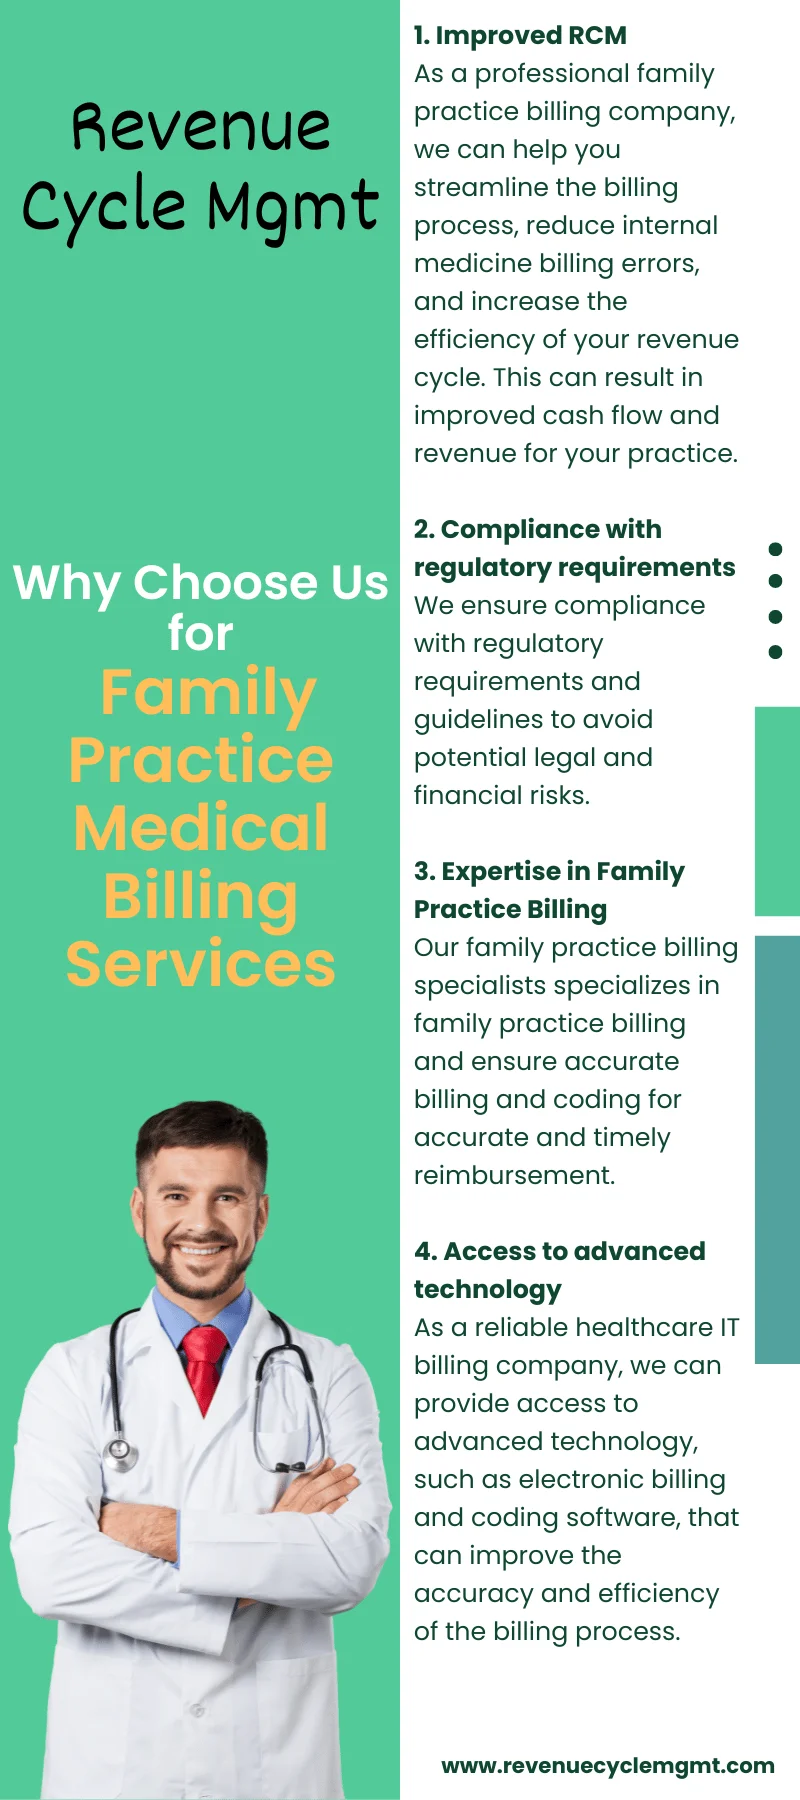 Why Choose Us for Family Practice Medical Billing Services